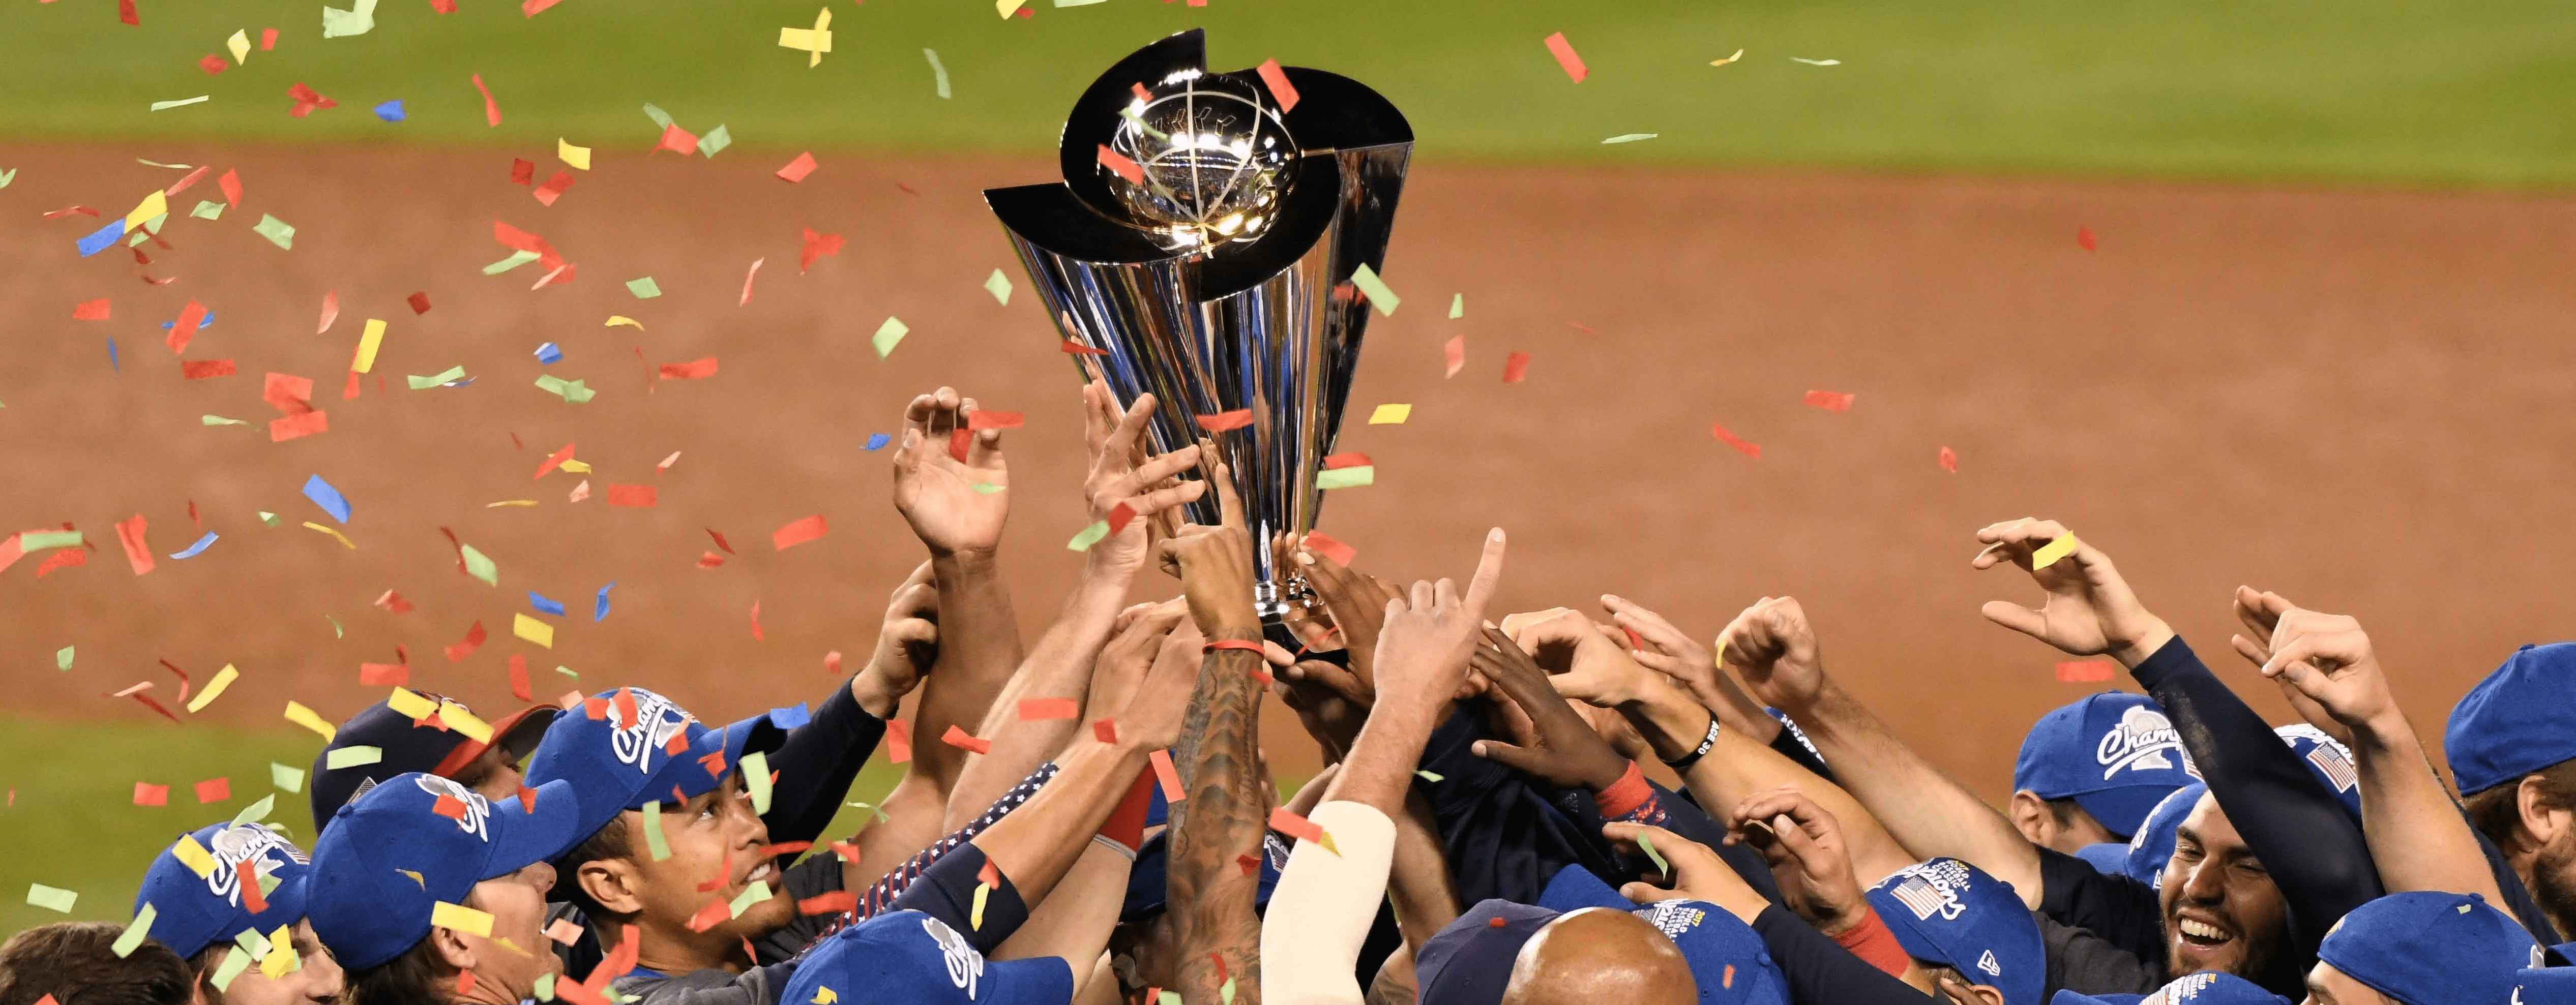 Yankees Allow Only 3 Players On WBC Duty While Mets Let 12